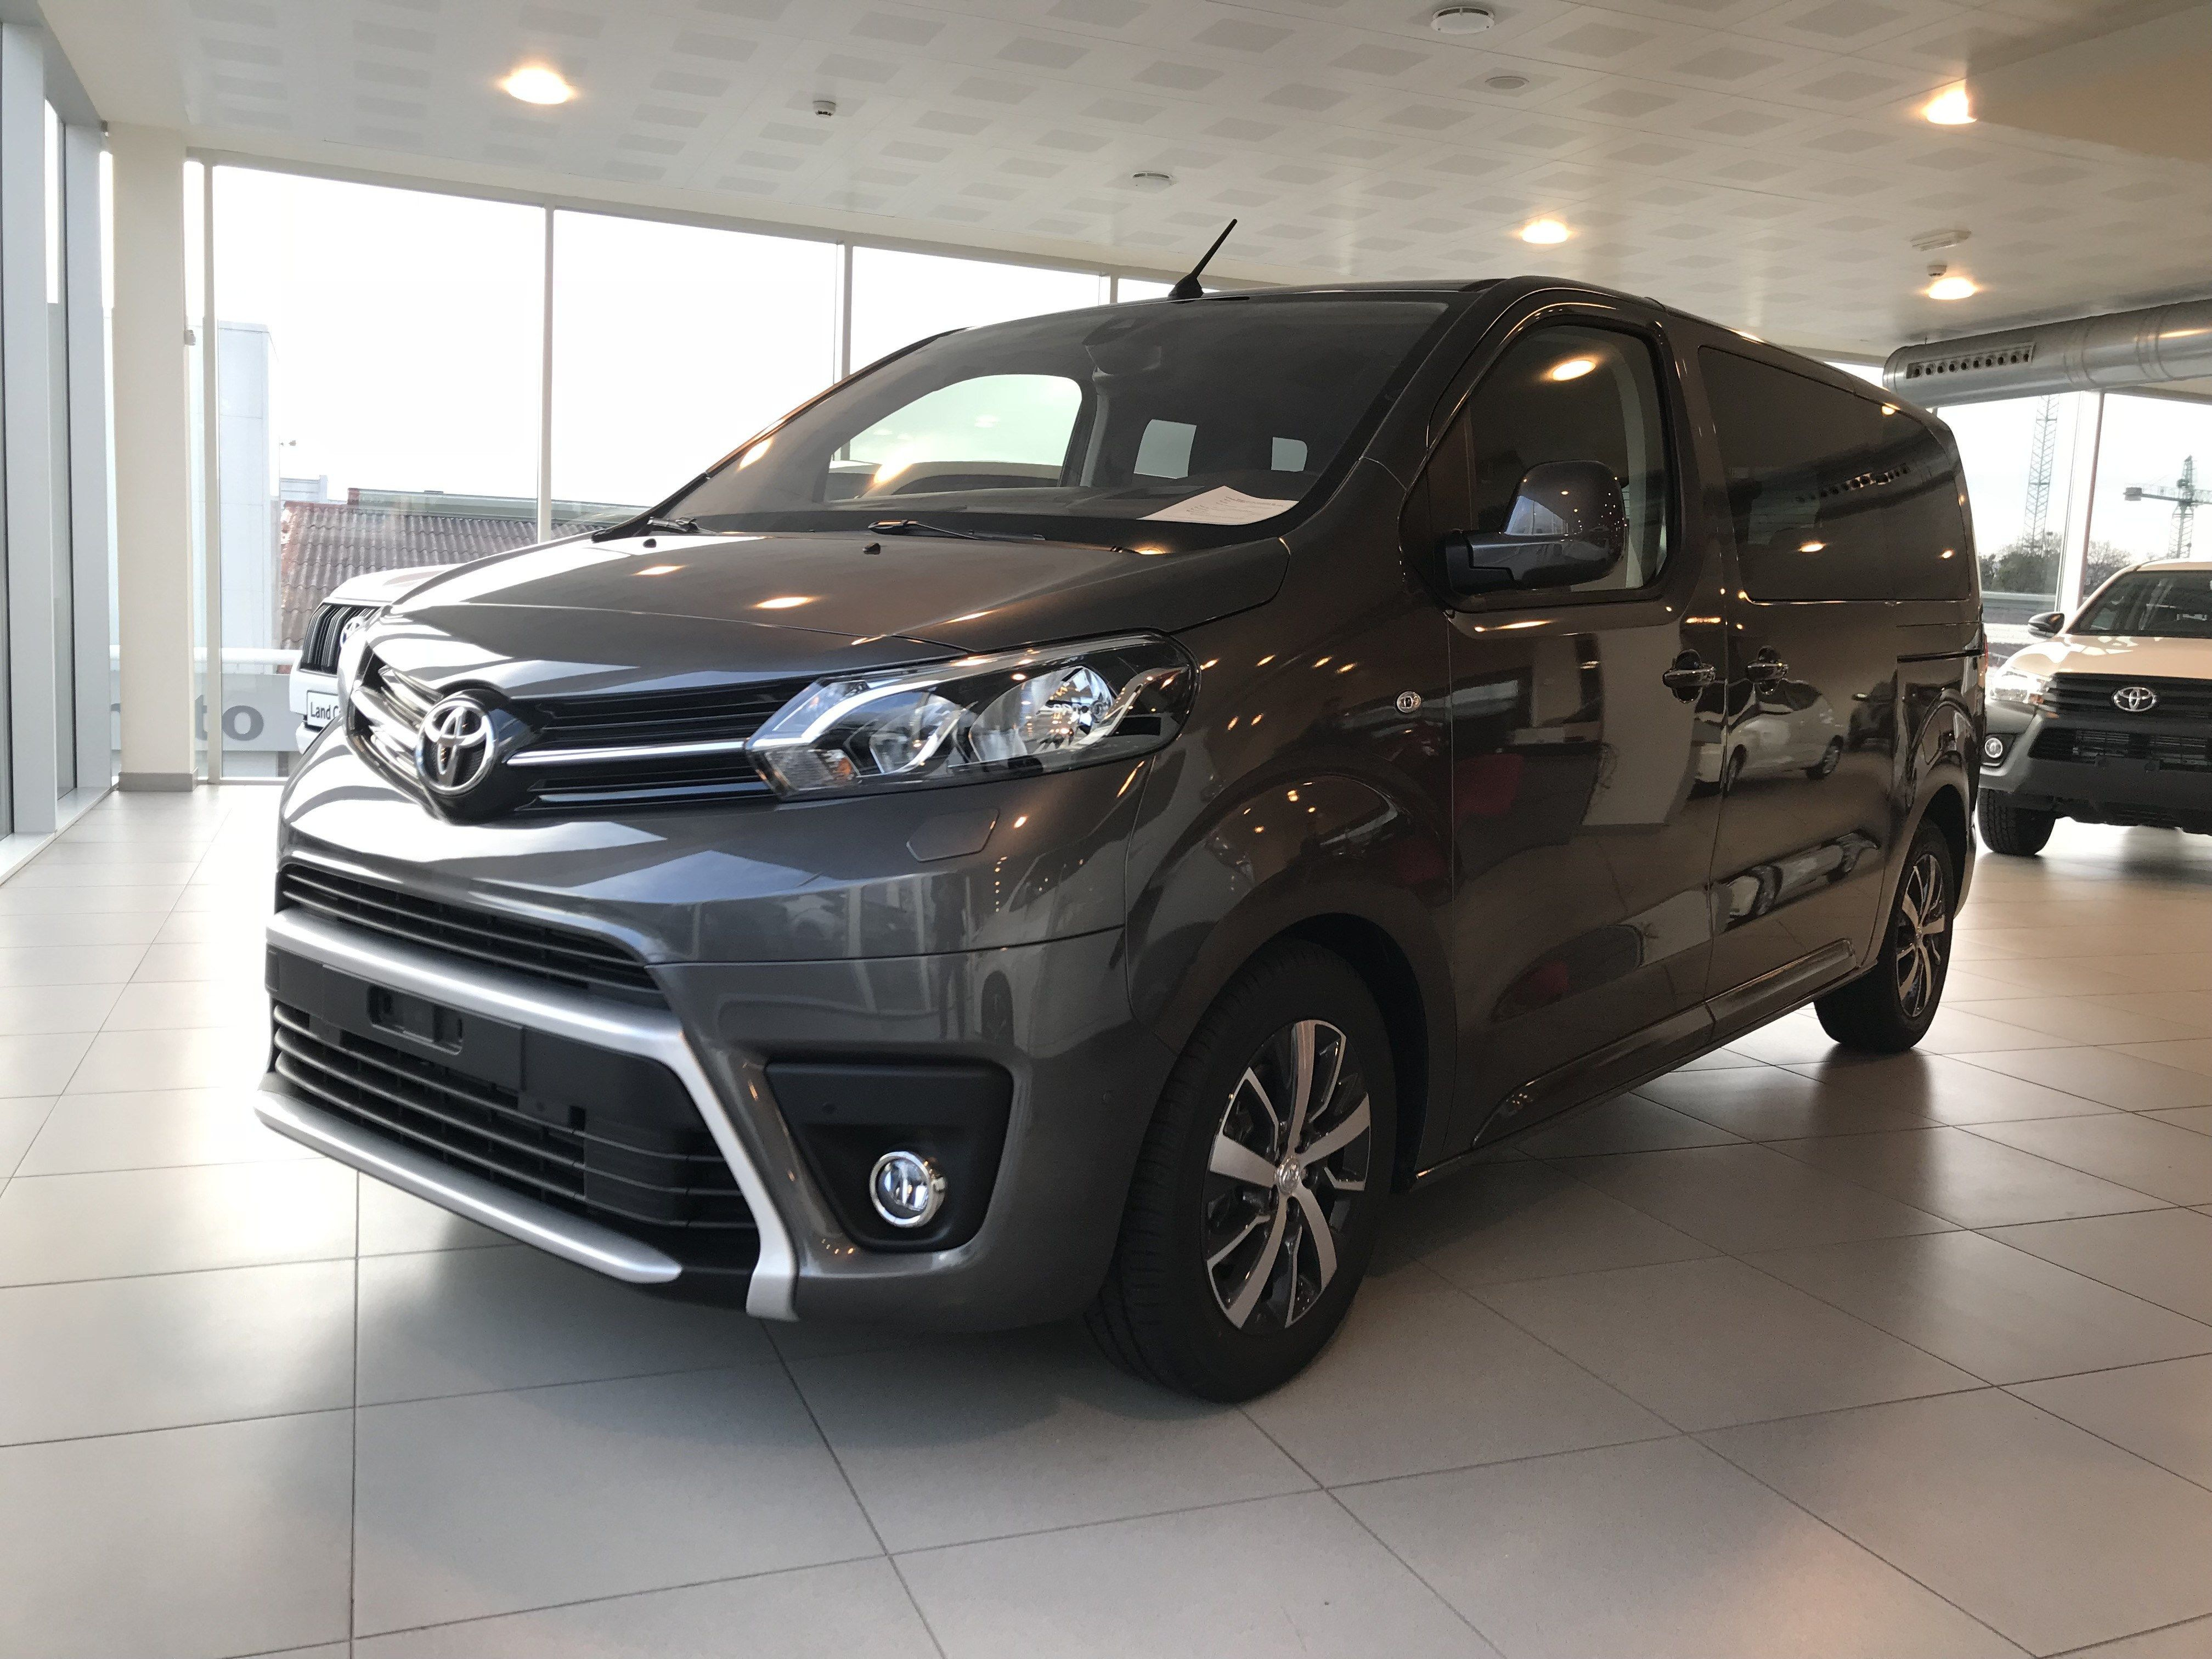 Toyota Fortuner 2019 Price Philippines Wallpaper - Toyota Avanza 2019 Price , HD Wallpaper & Backgrounds